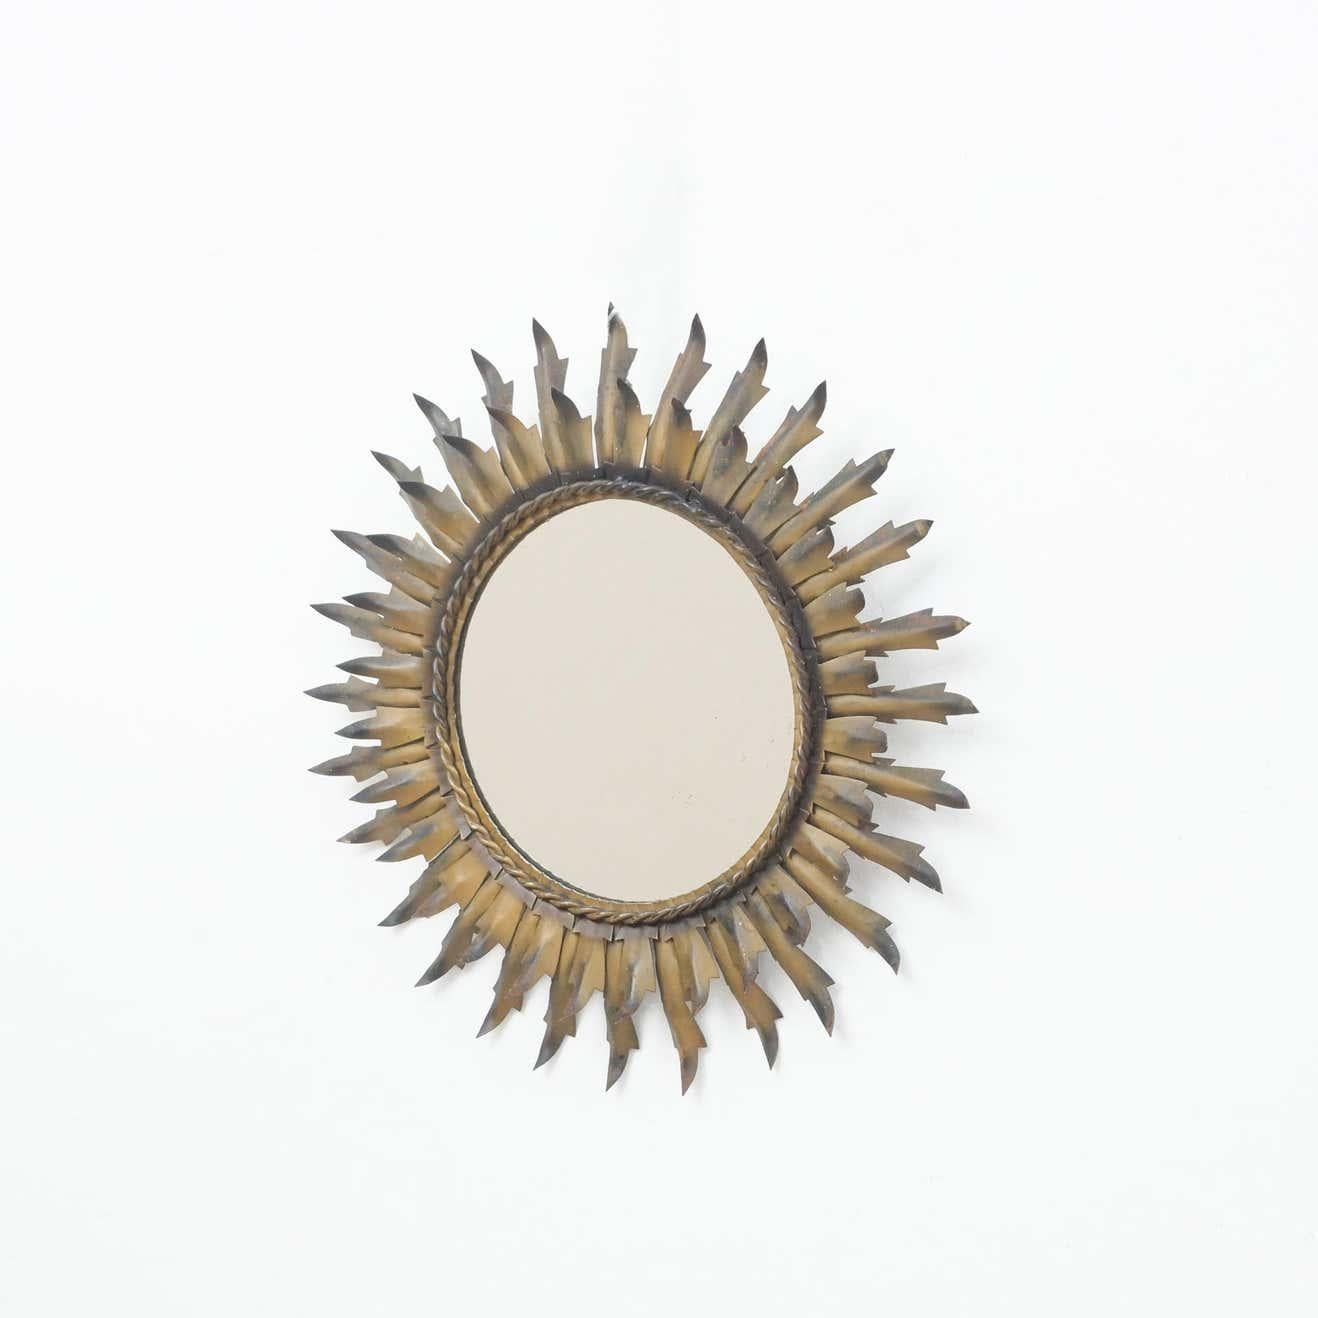 Mid-Century Modern sunburst mirror brass, circa 1960
Traditionally manufactured in France.
By unknown designer.

In original condition with minor wear consistent of age and use, preserving a beautiful patina.

